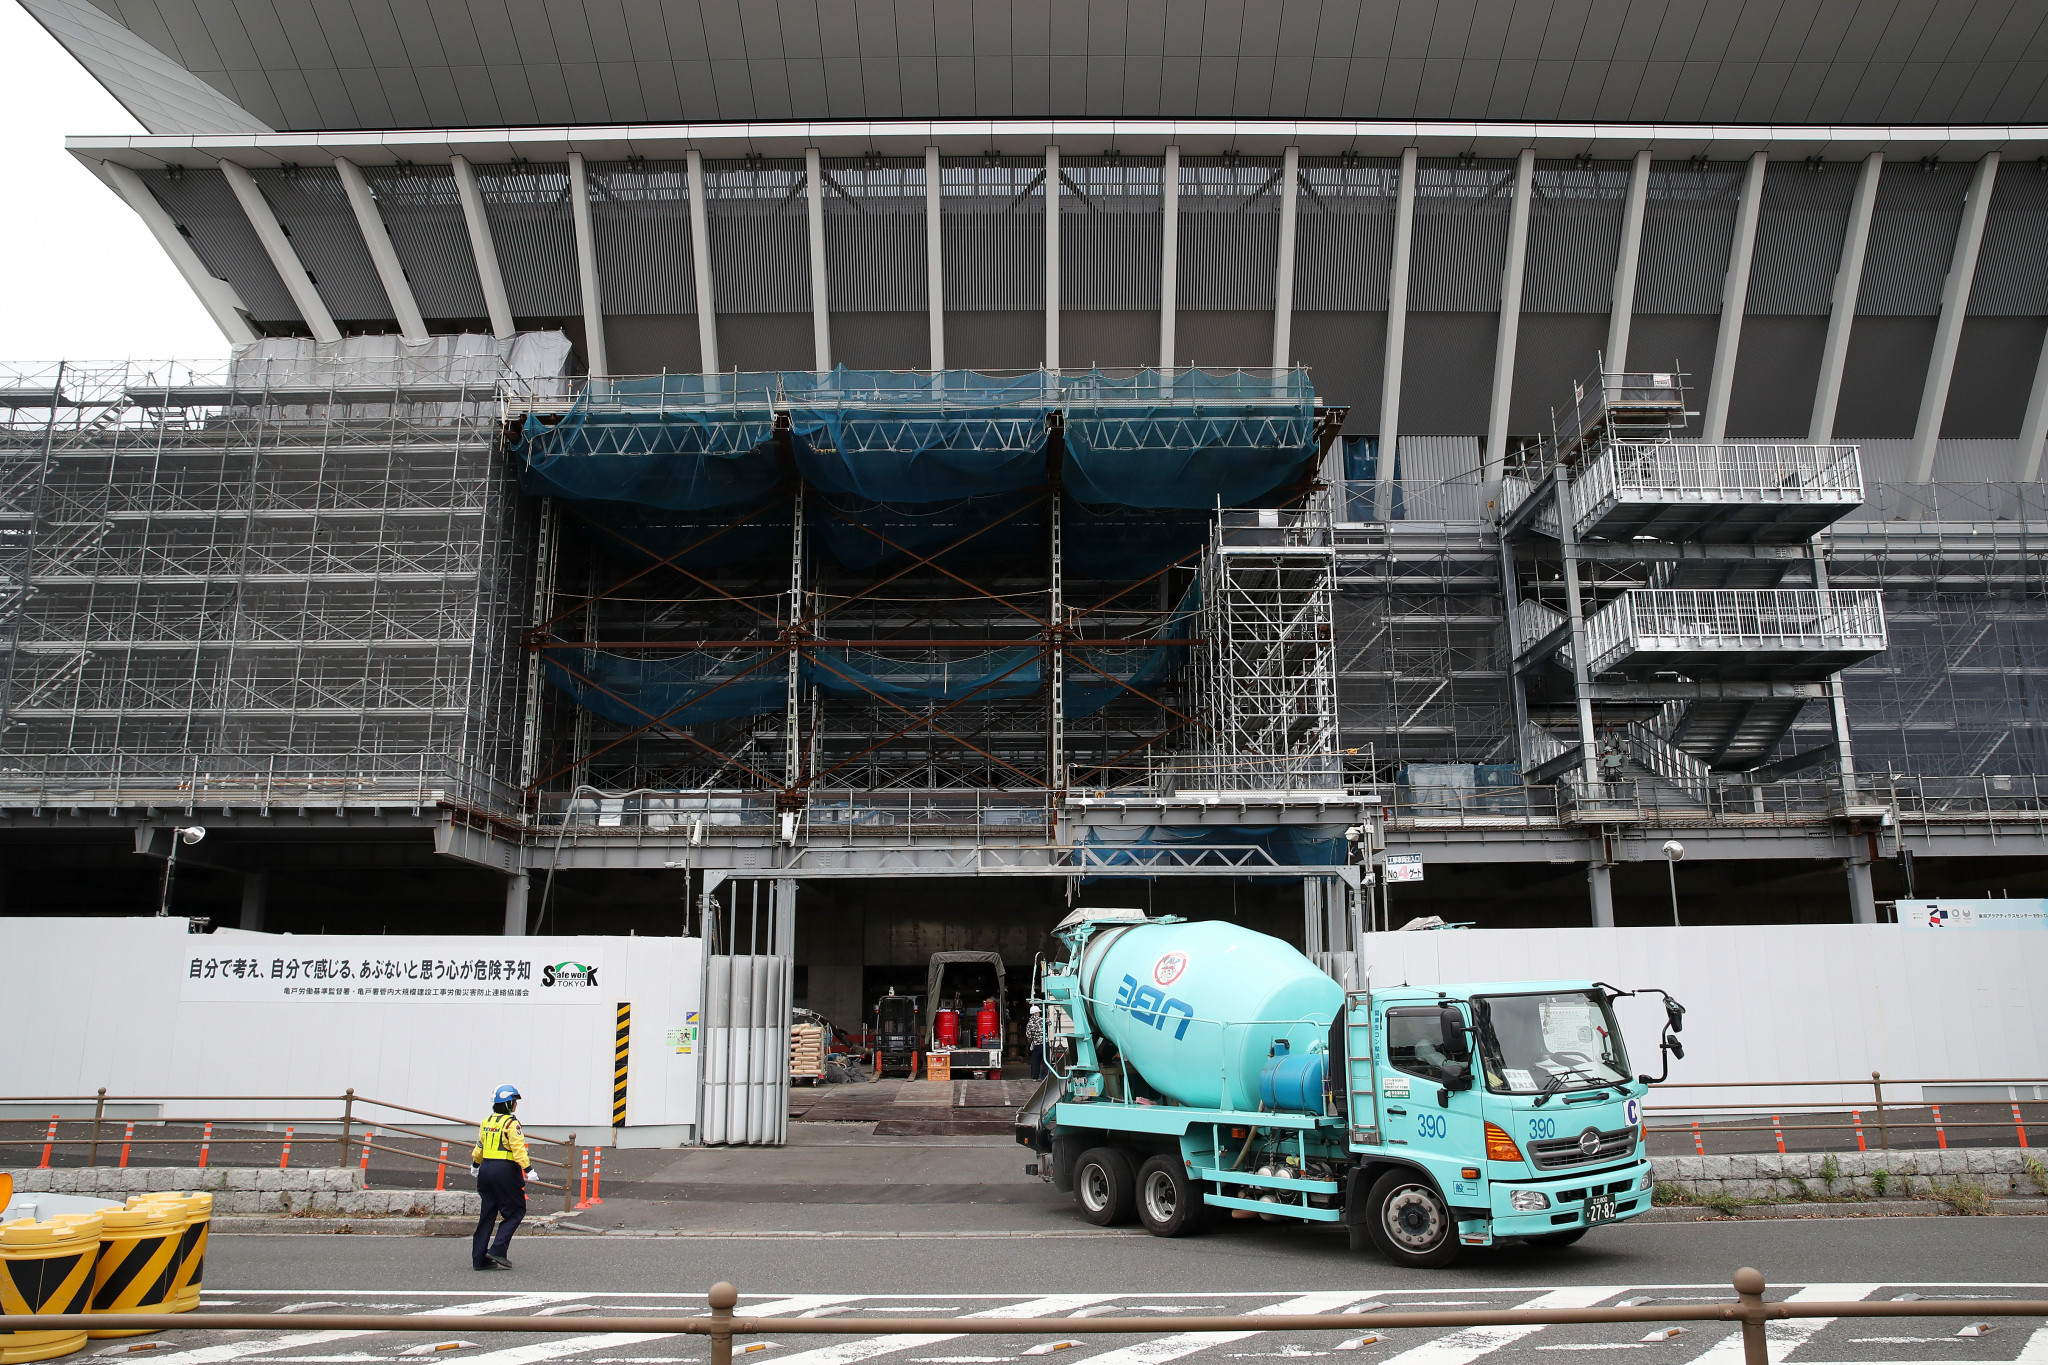 Union seek venue inspection amid safety concerns for Tokyo 2020 migrant workers